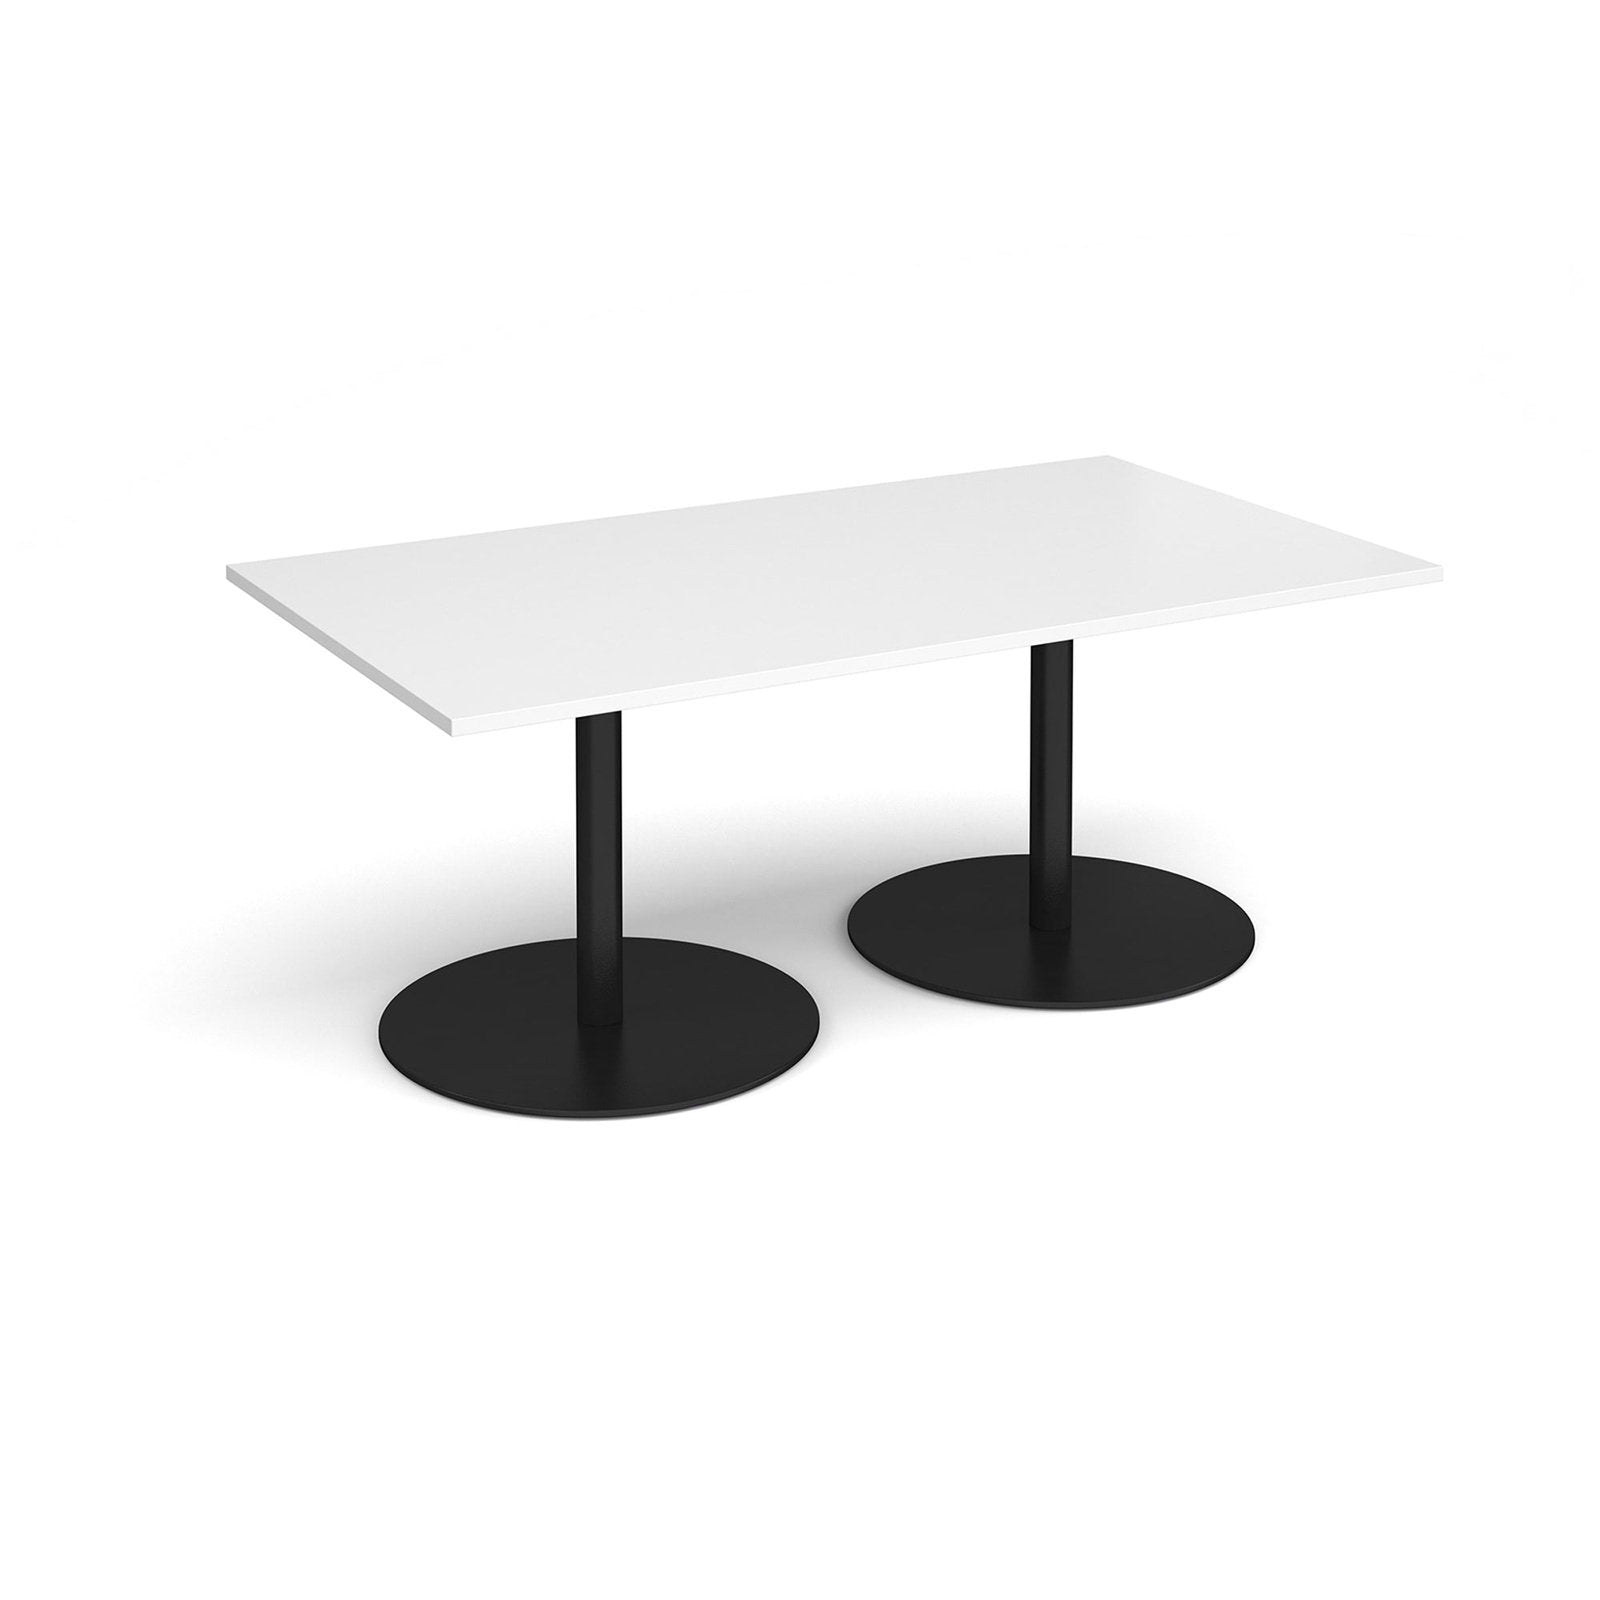 Eternal rectangular boardroom table - Office Products Online